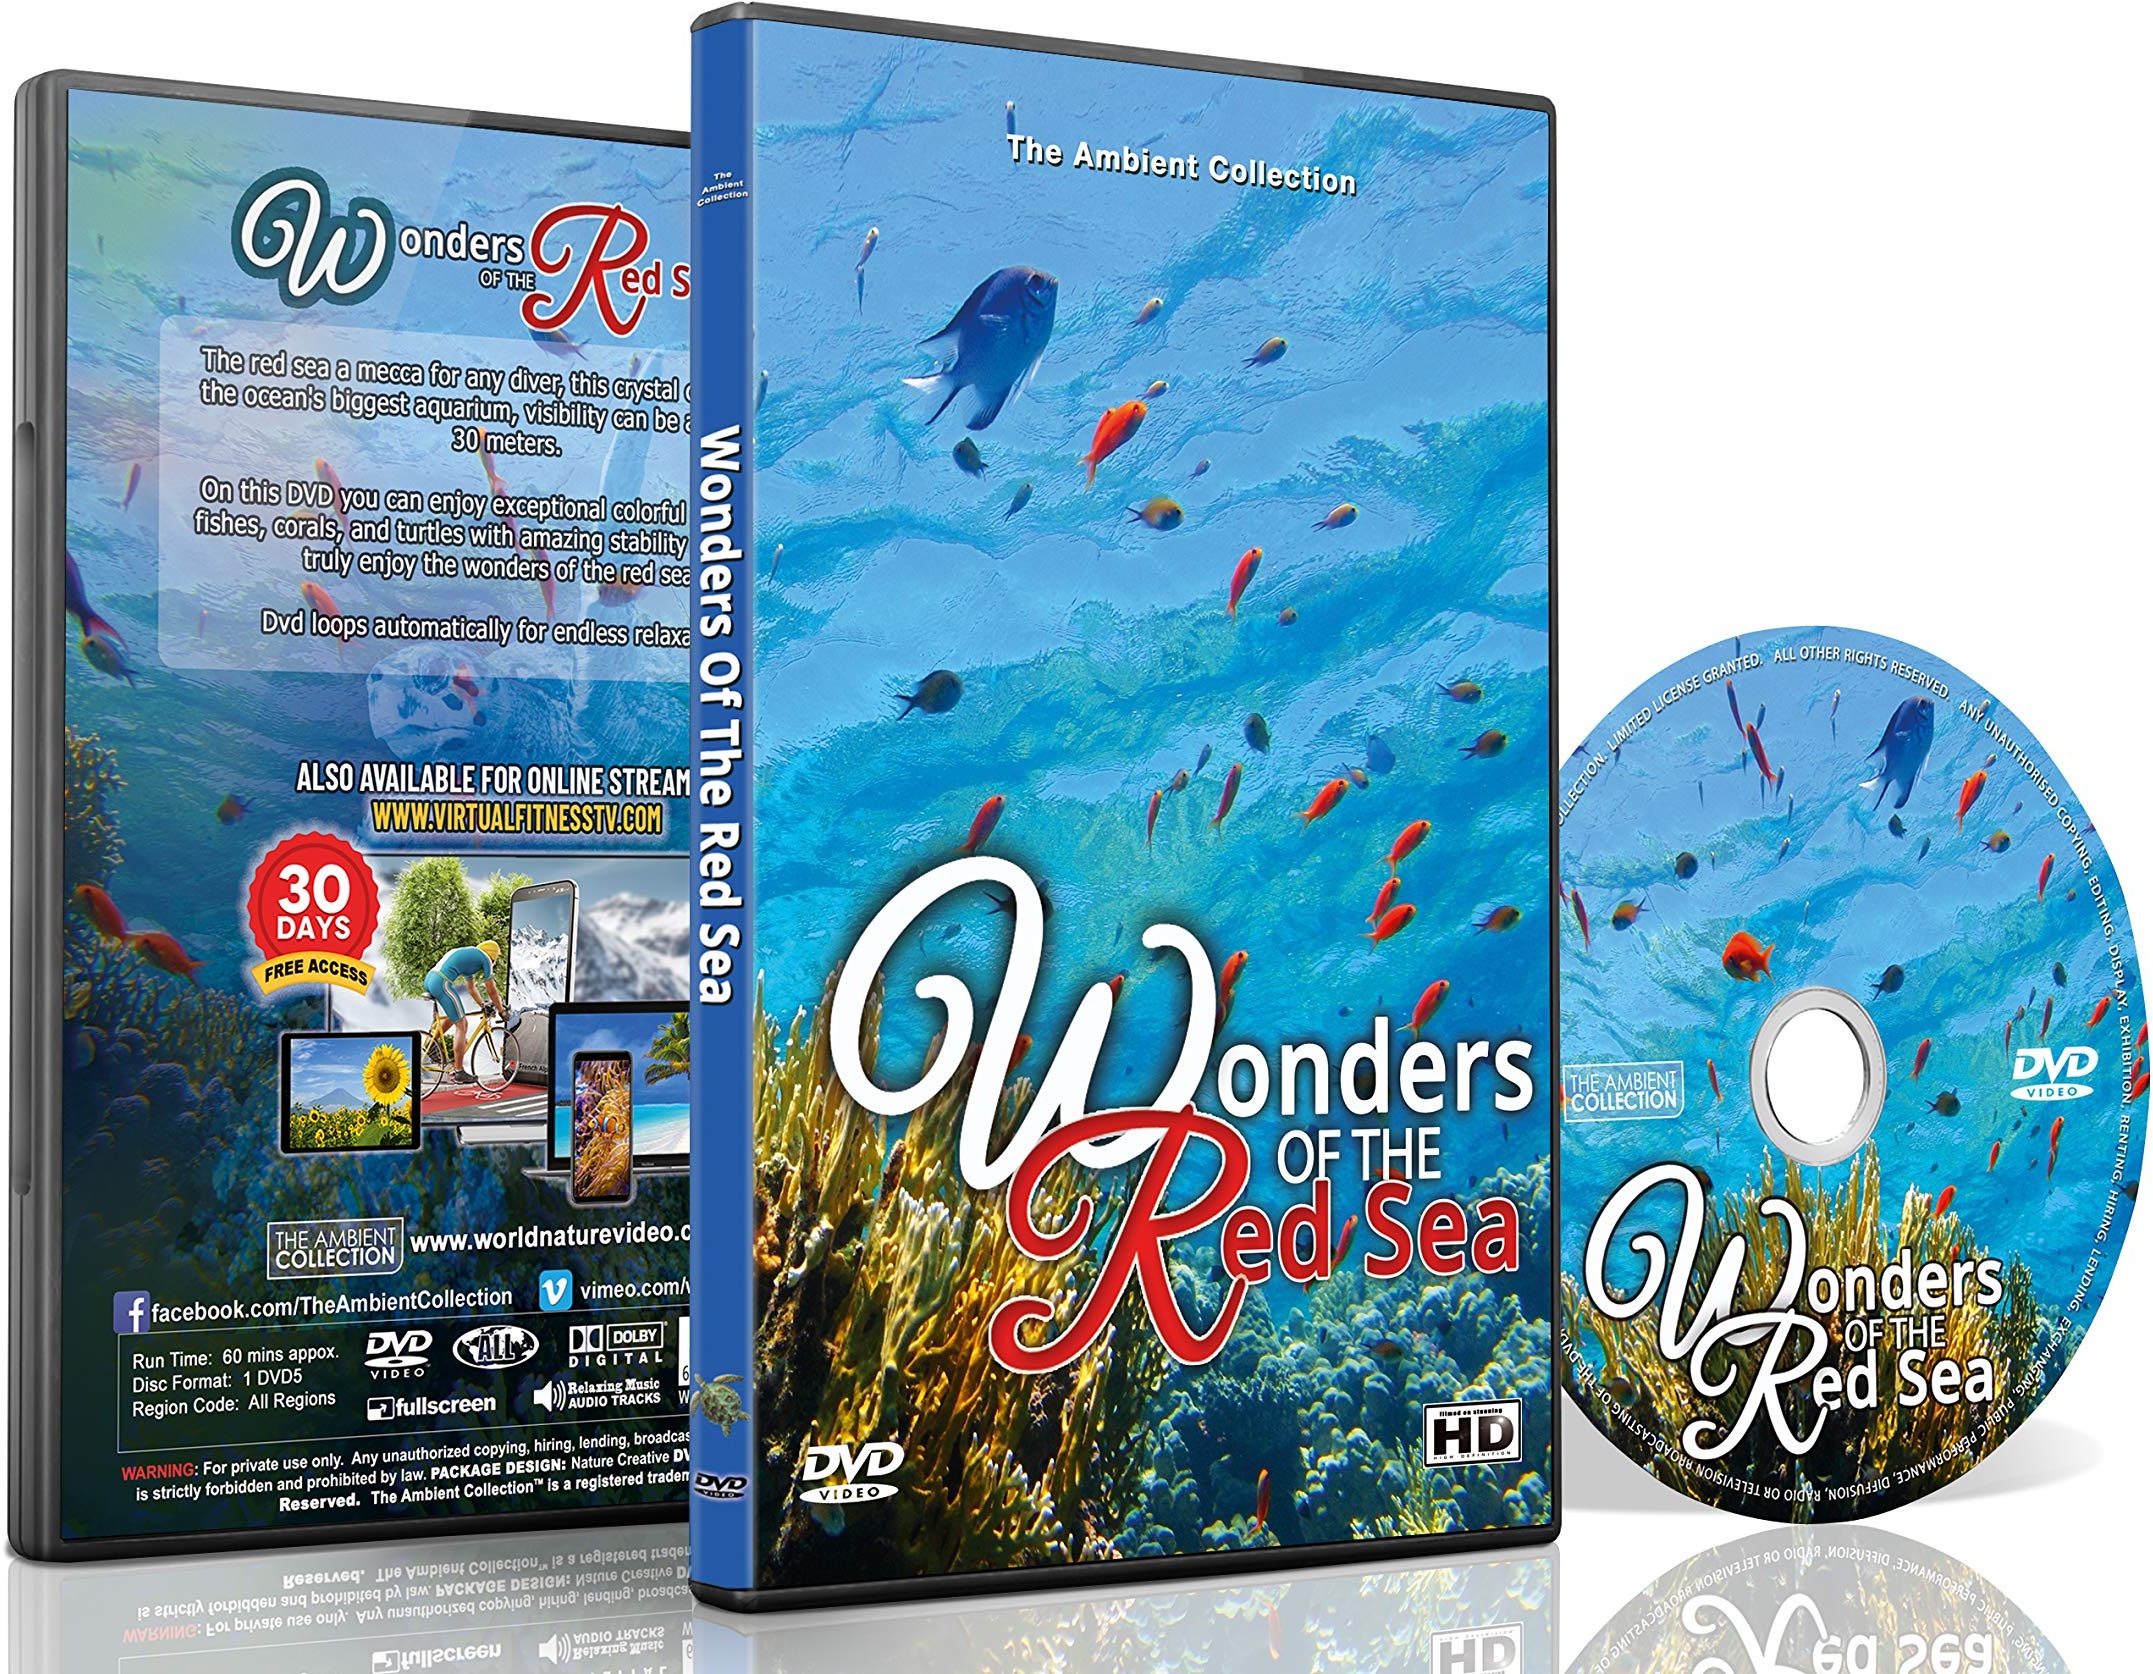 Underwater DVD - Wonders of the Red Sea - Explore Colorful Scenery of Fishes, Corals and Sea Turtles in Amazing Crystal Clear Ocean Seawater